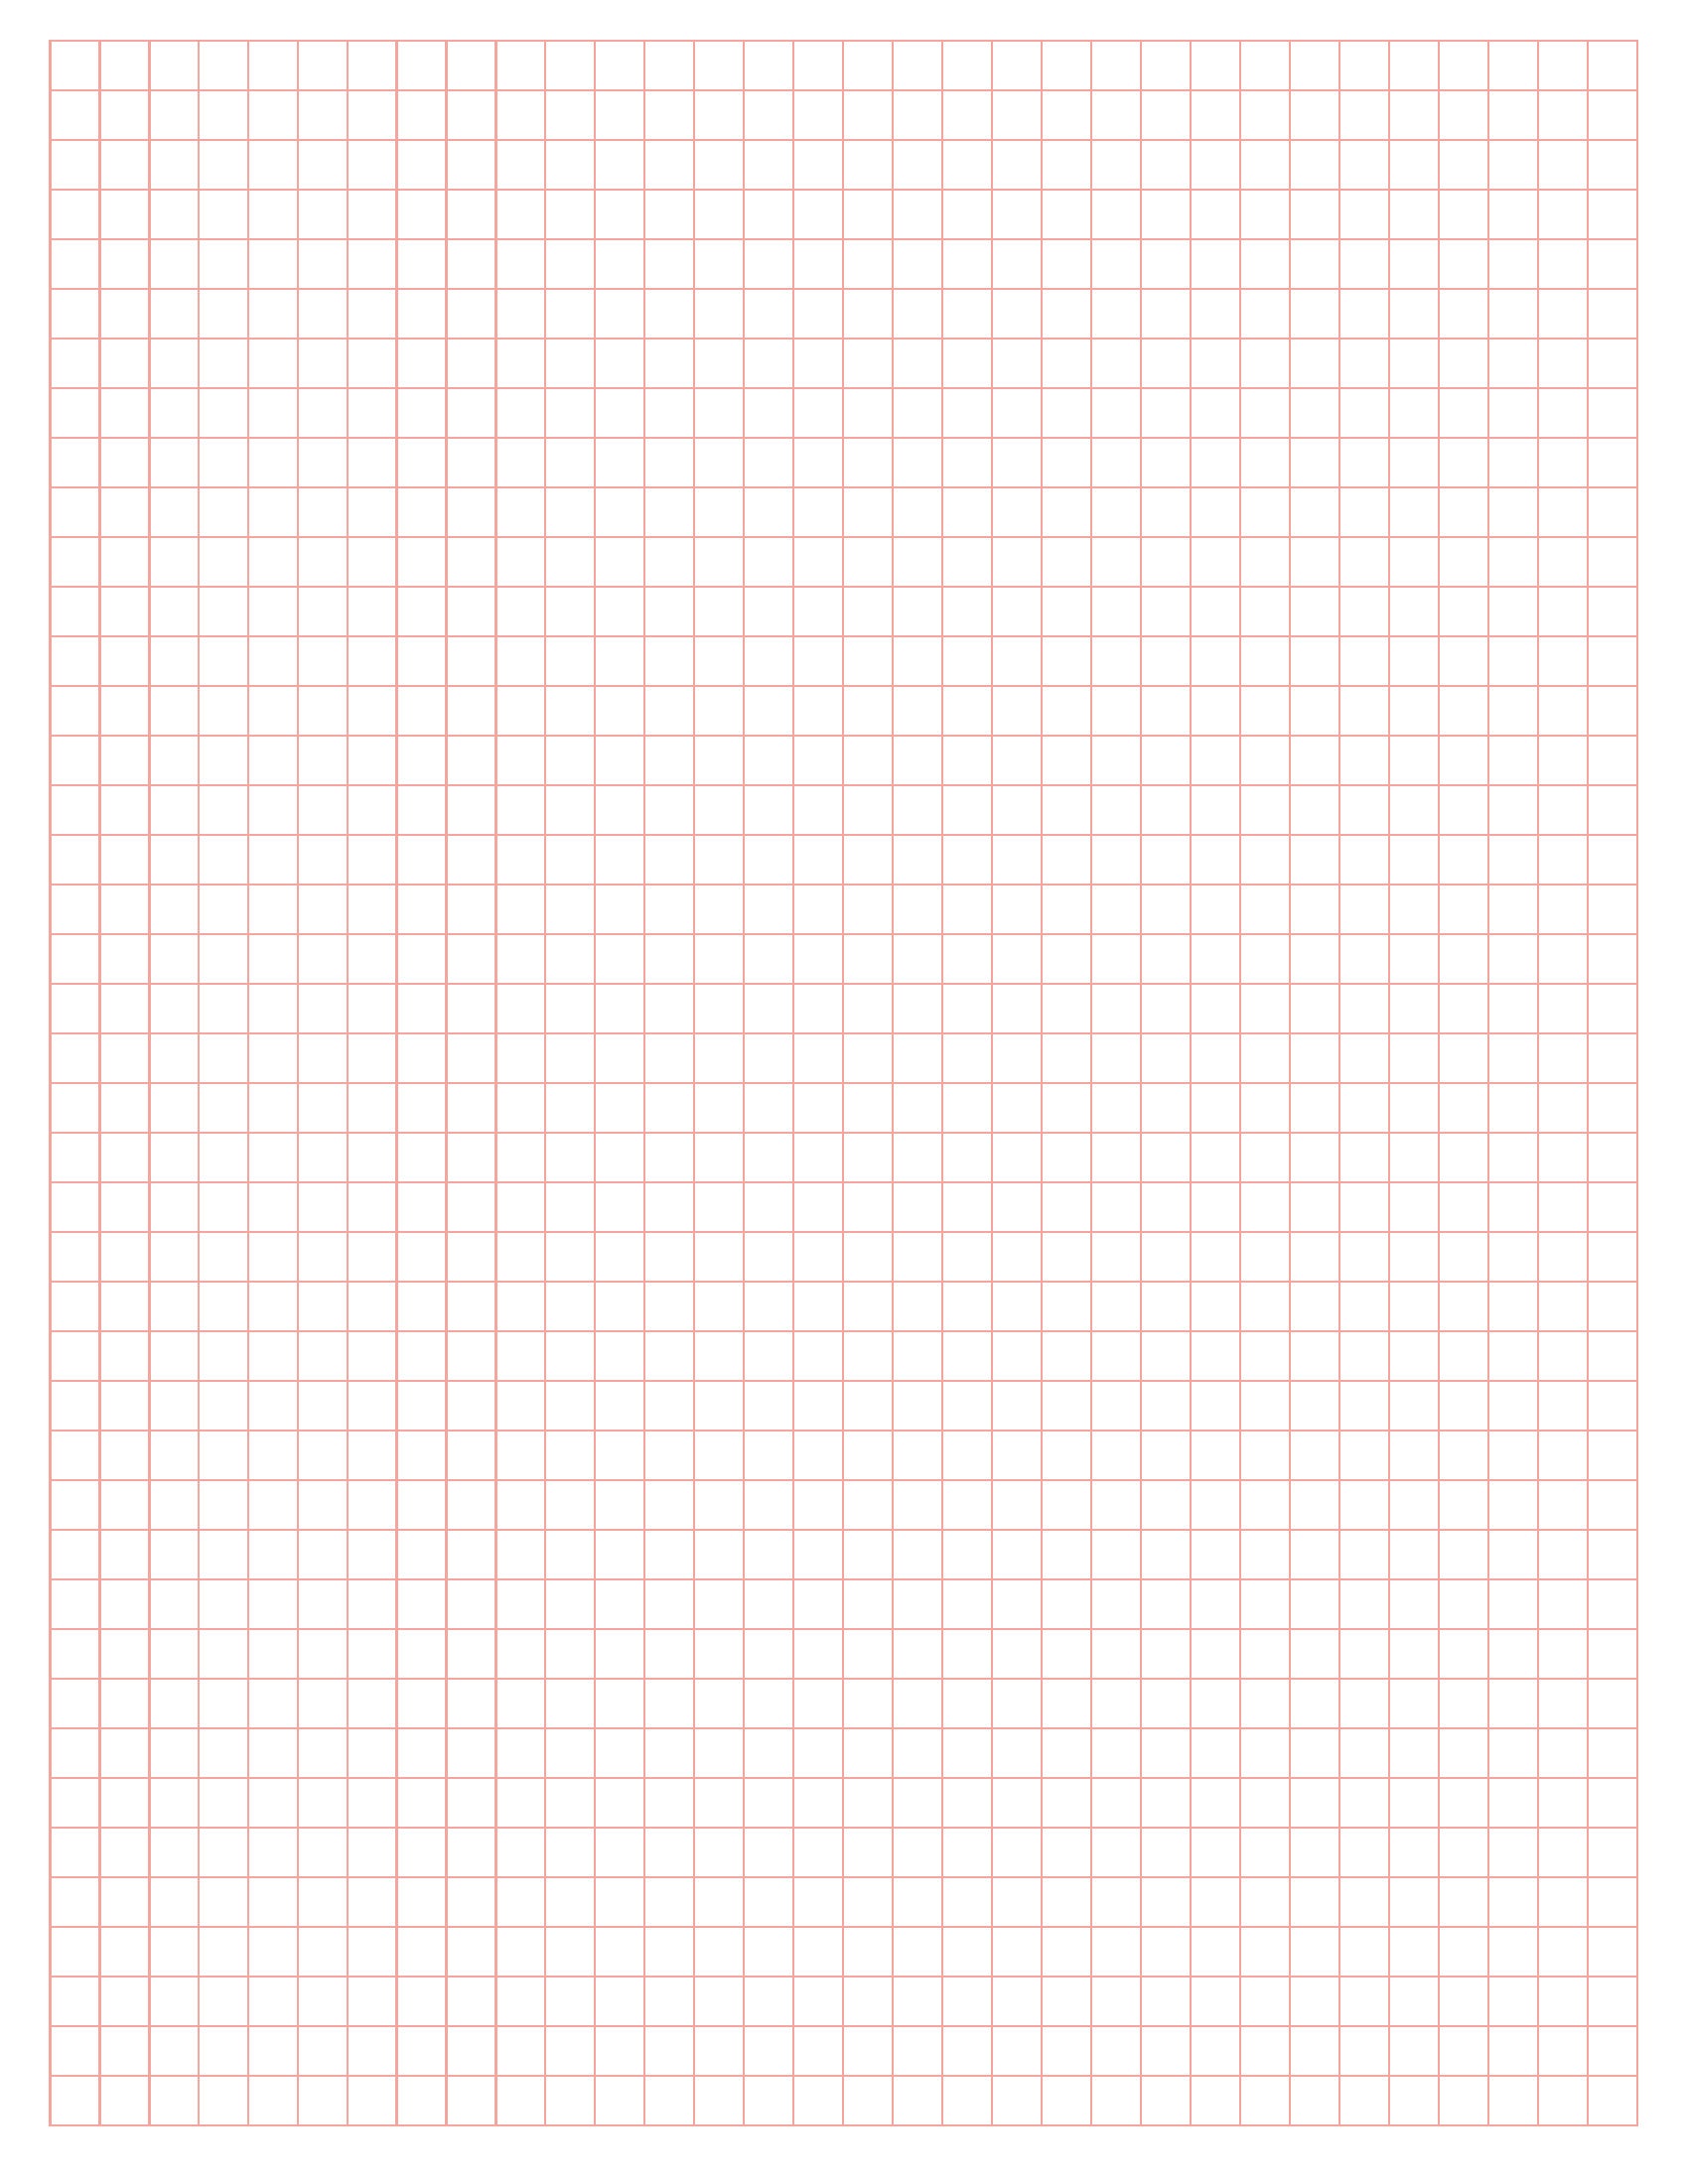 10-1-inch-graph-papers-sample-templates-free-printable-printable-110-inch-graph-paper-pdf-from